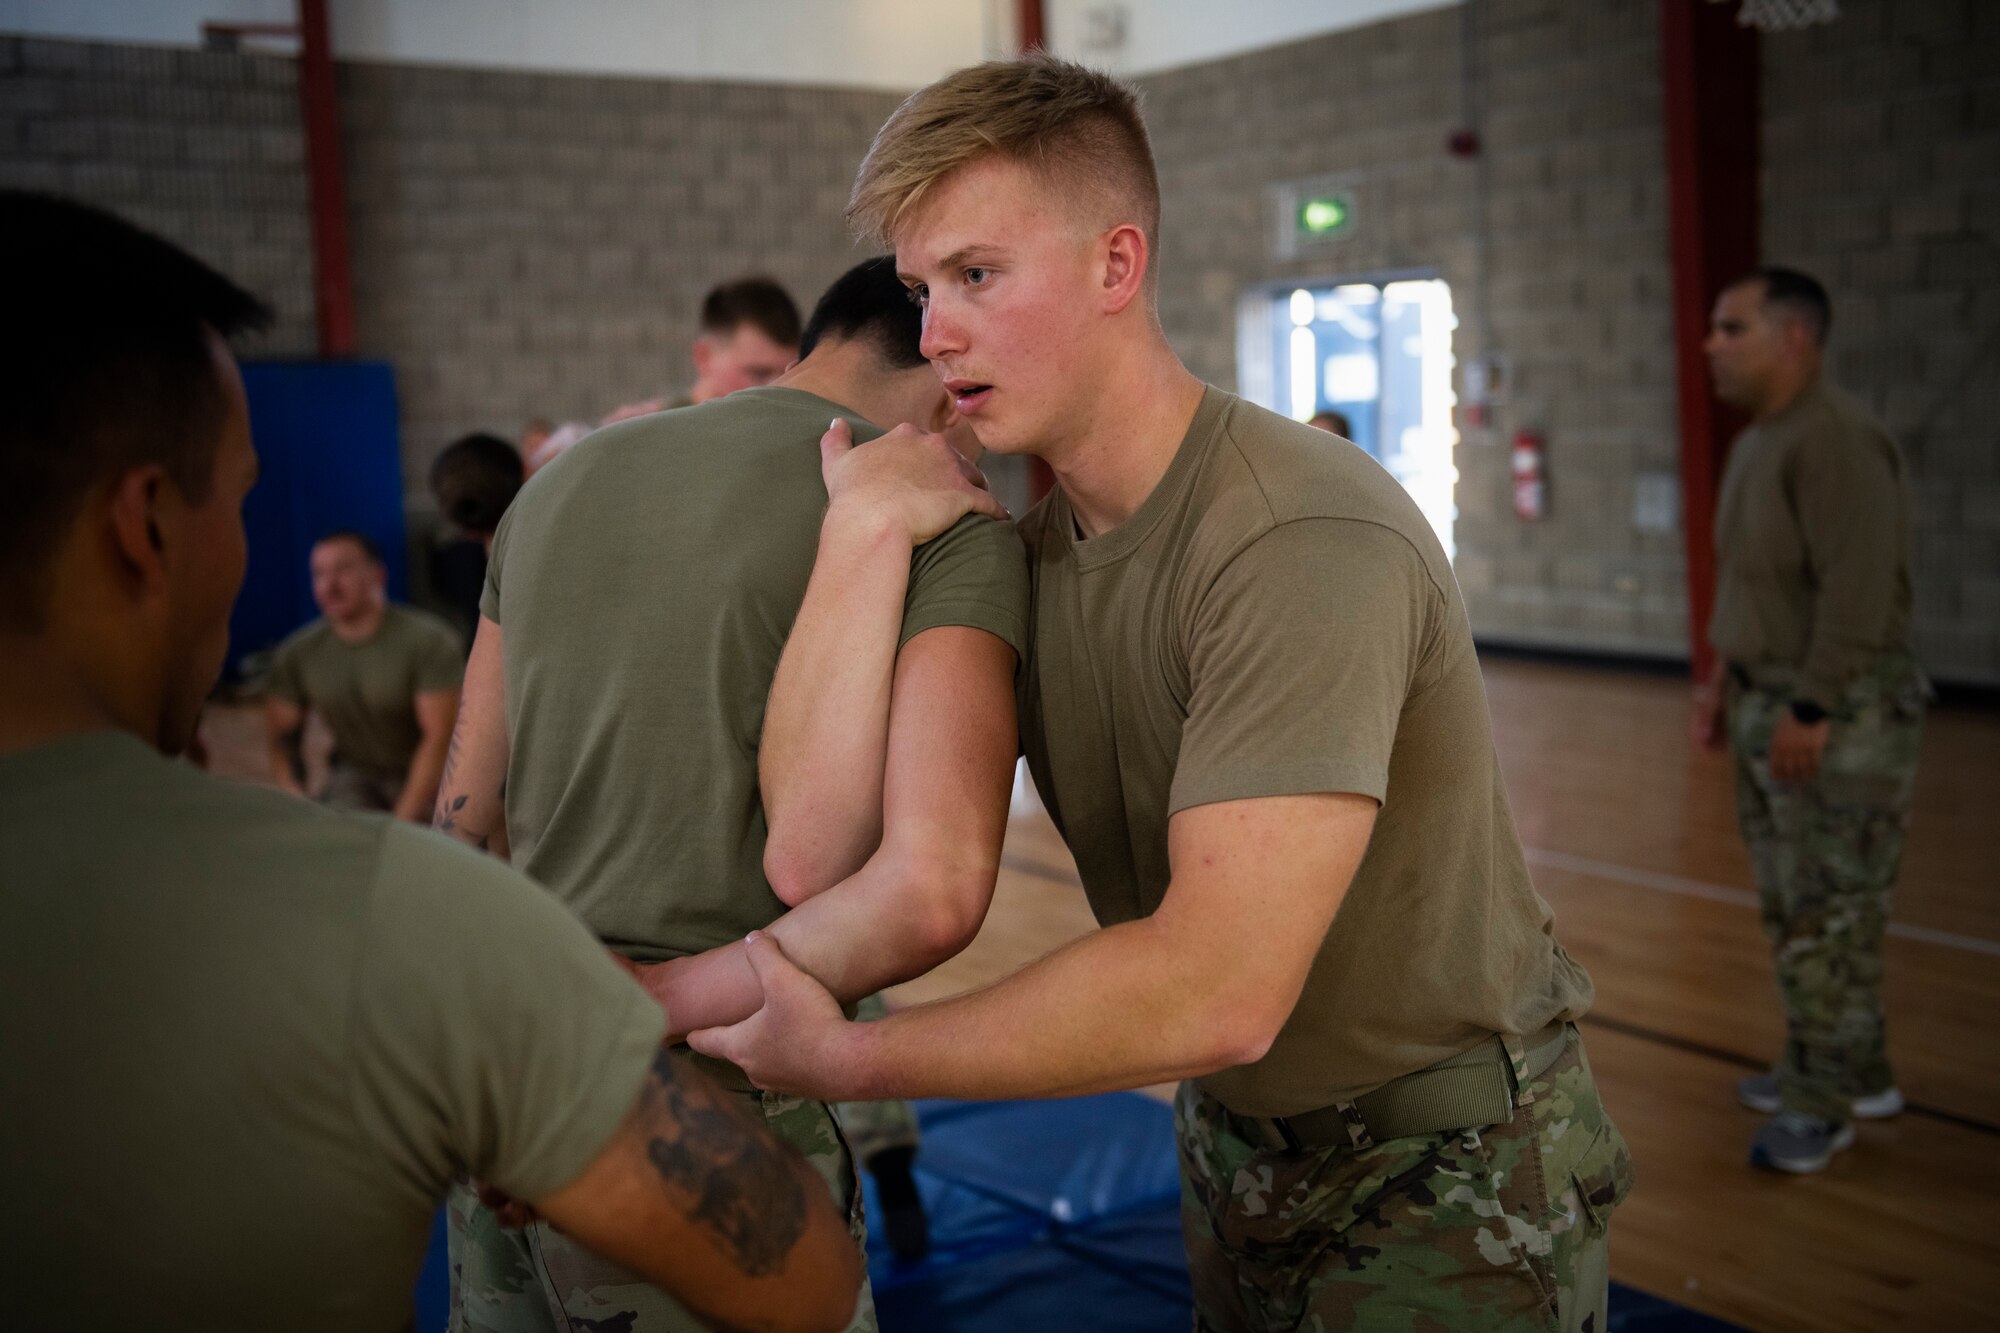 Airmen practice martial arts on each other during training.